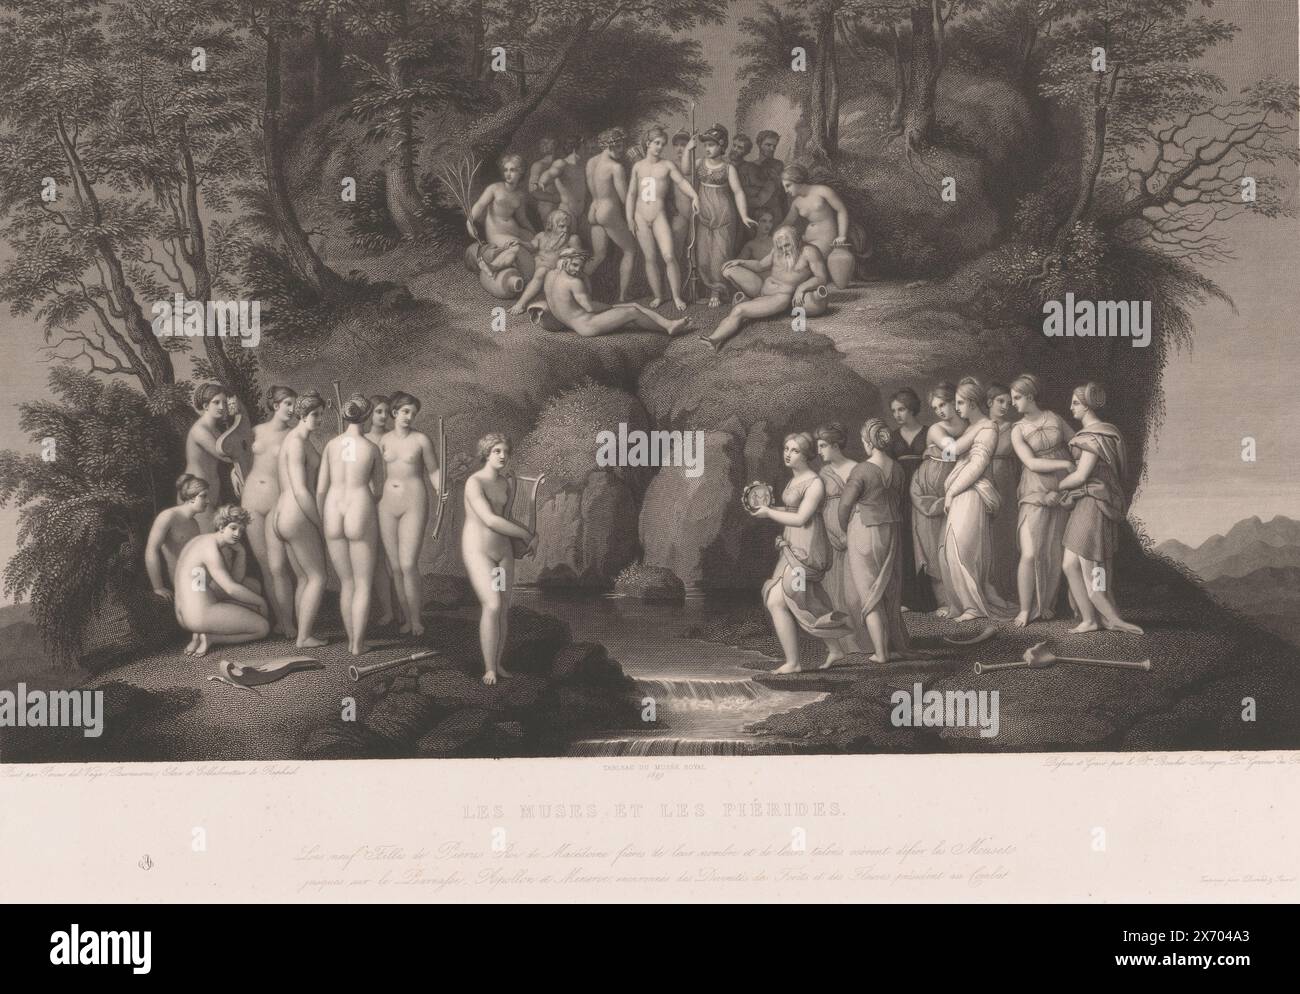 Contest between the Muses and the Pierides, Les Muses et les Piérides (title on object), print, print maker: Auguste Gaspard Louis Desnoyers, (mentioned on object), after drawing by: Auguste Gaspard Louis Desnoyers, (mentioned on object), after painting by: Perino del Vaga, (mentioned on object), Paris, 1829 - 1831, paper, etching, engraving, height, 443 mm × width, 651 mm Stock Photo